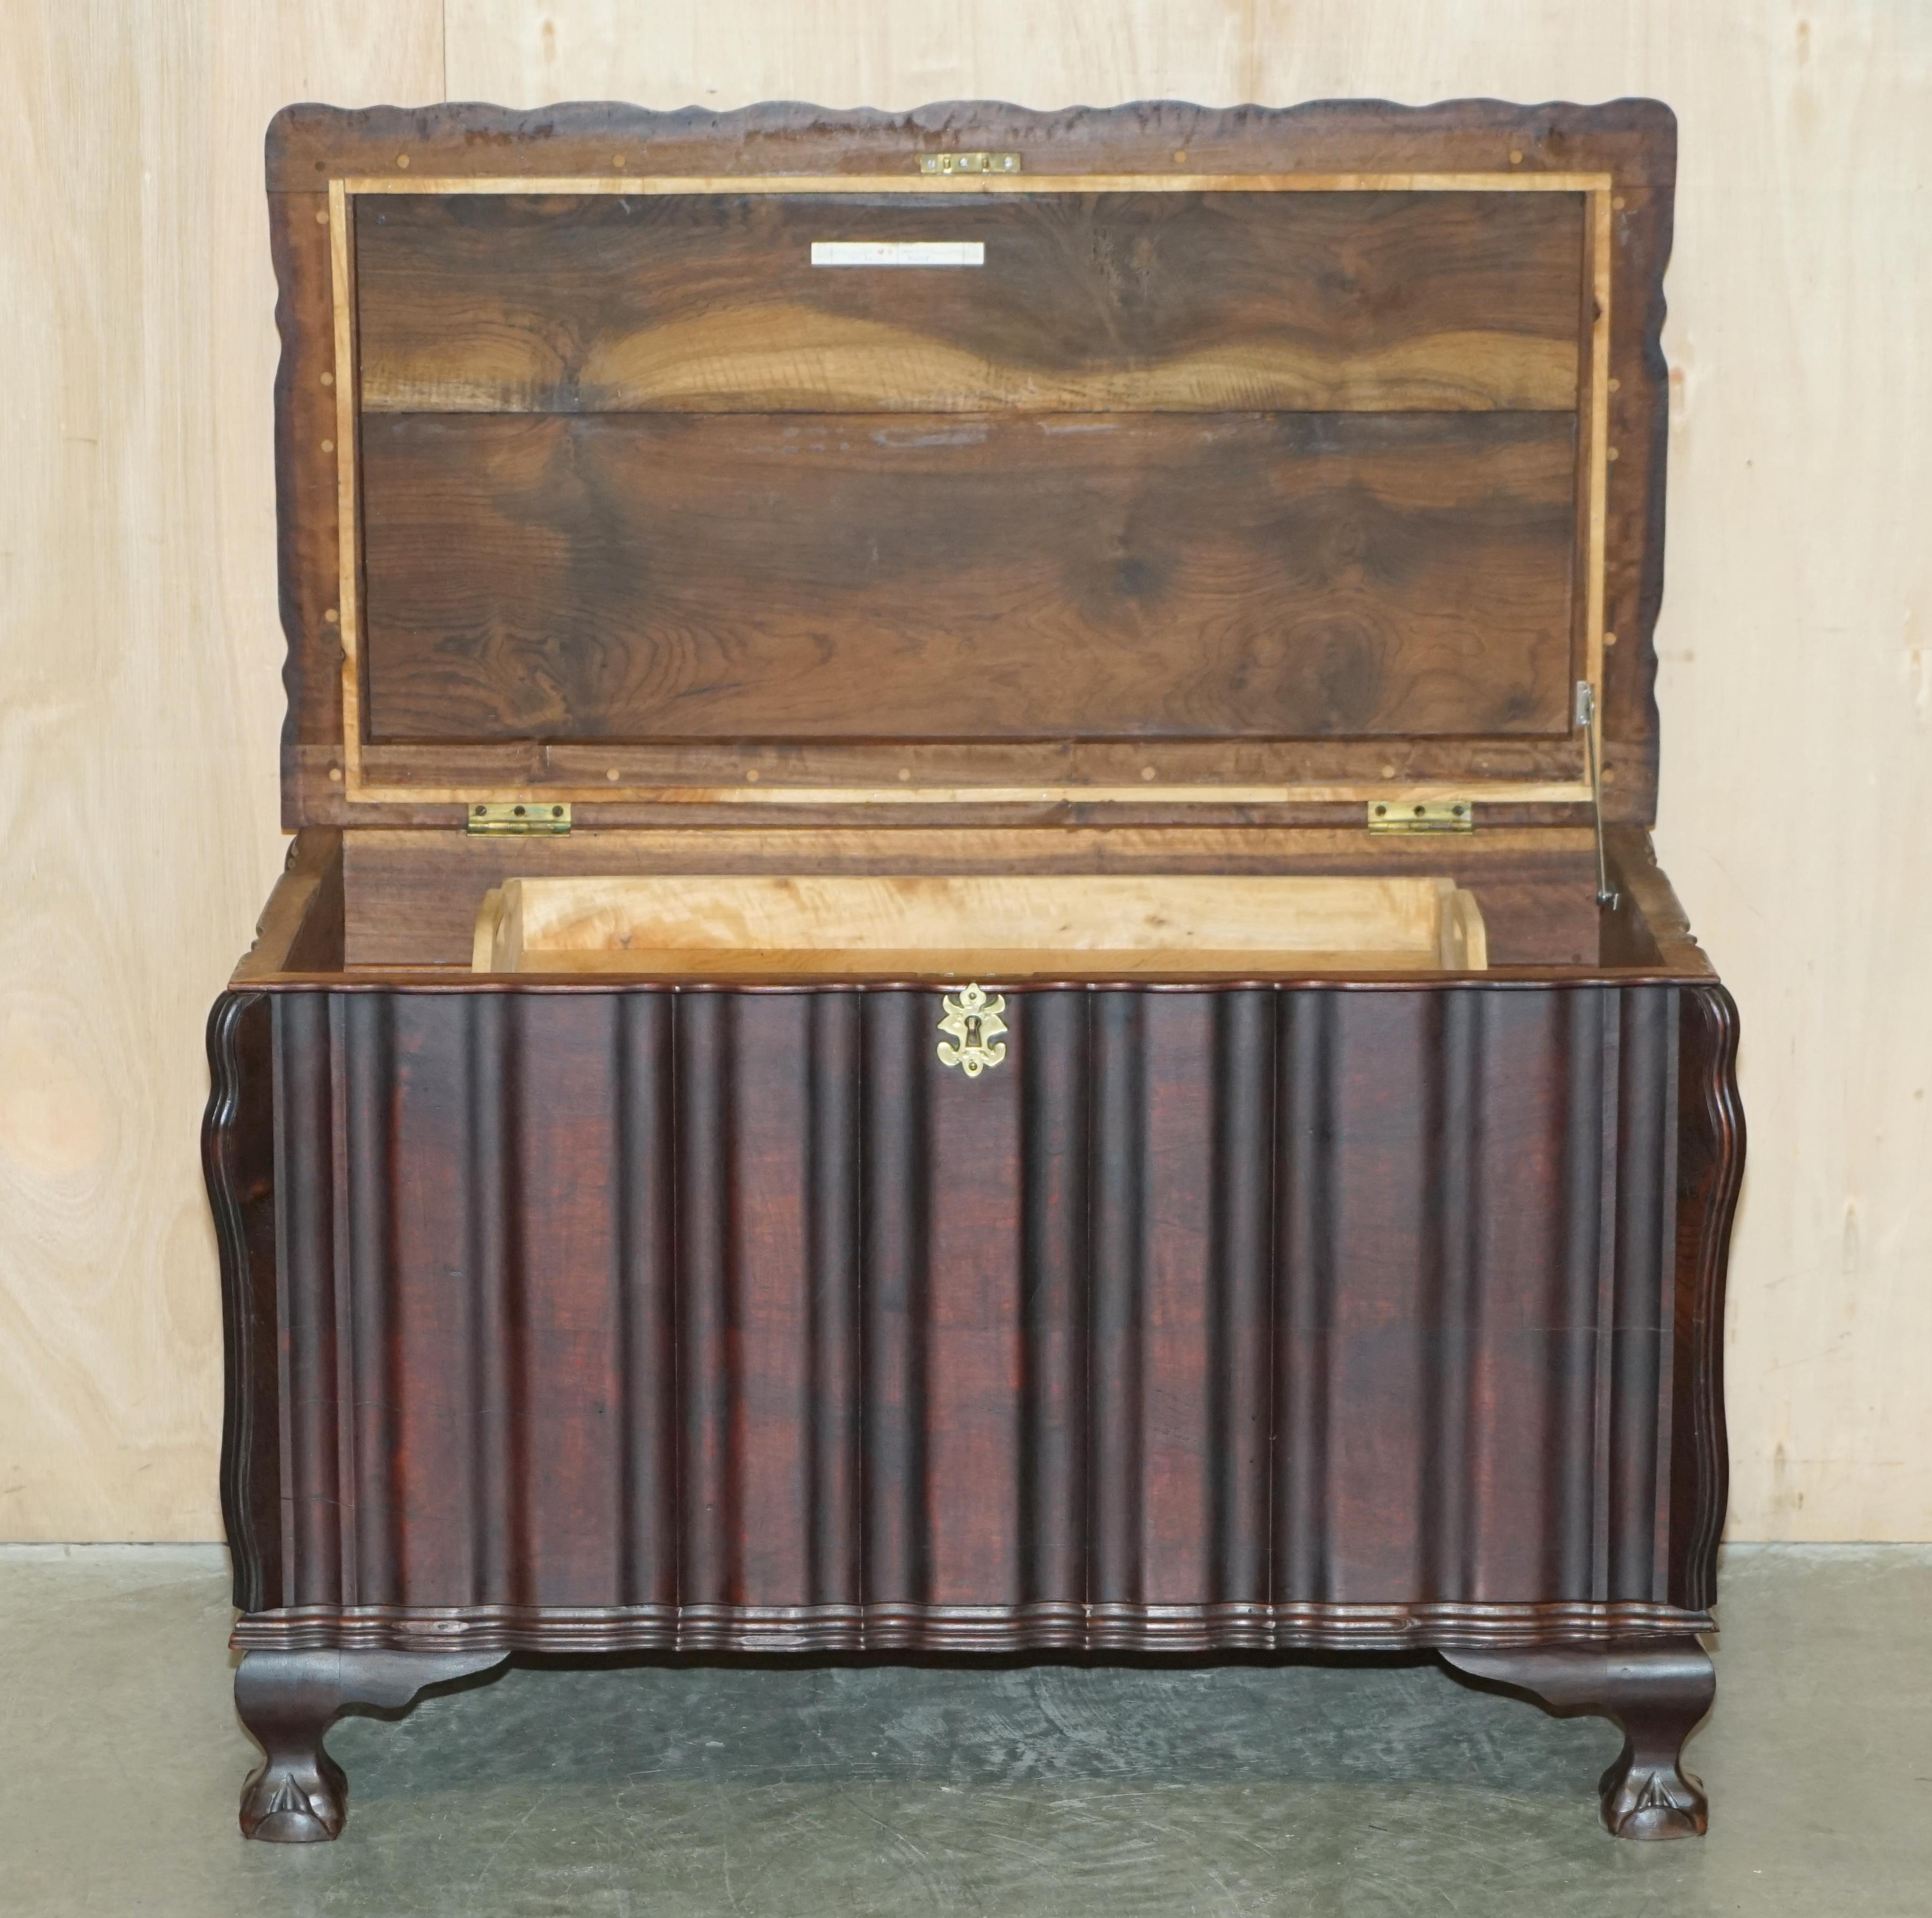 ViNTAGE HAND CARved HARDWOOD TRUNK OR CHEST WITH ORNATE OVERSIZED BRASS FITTINGS im Angebot 10